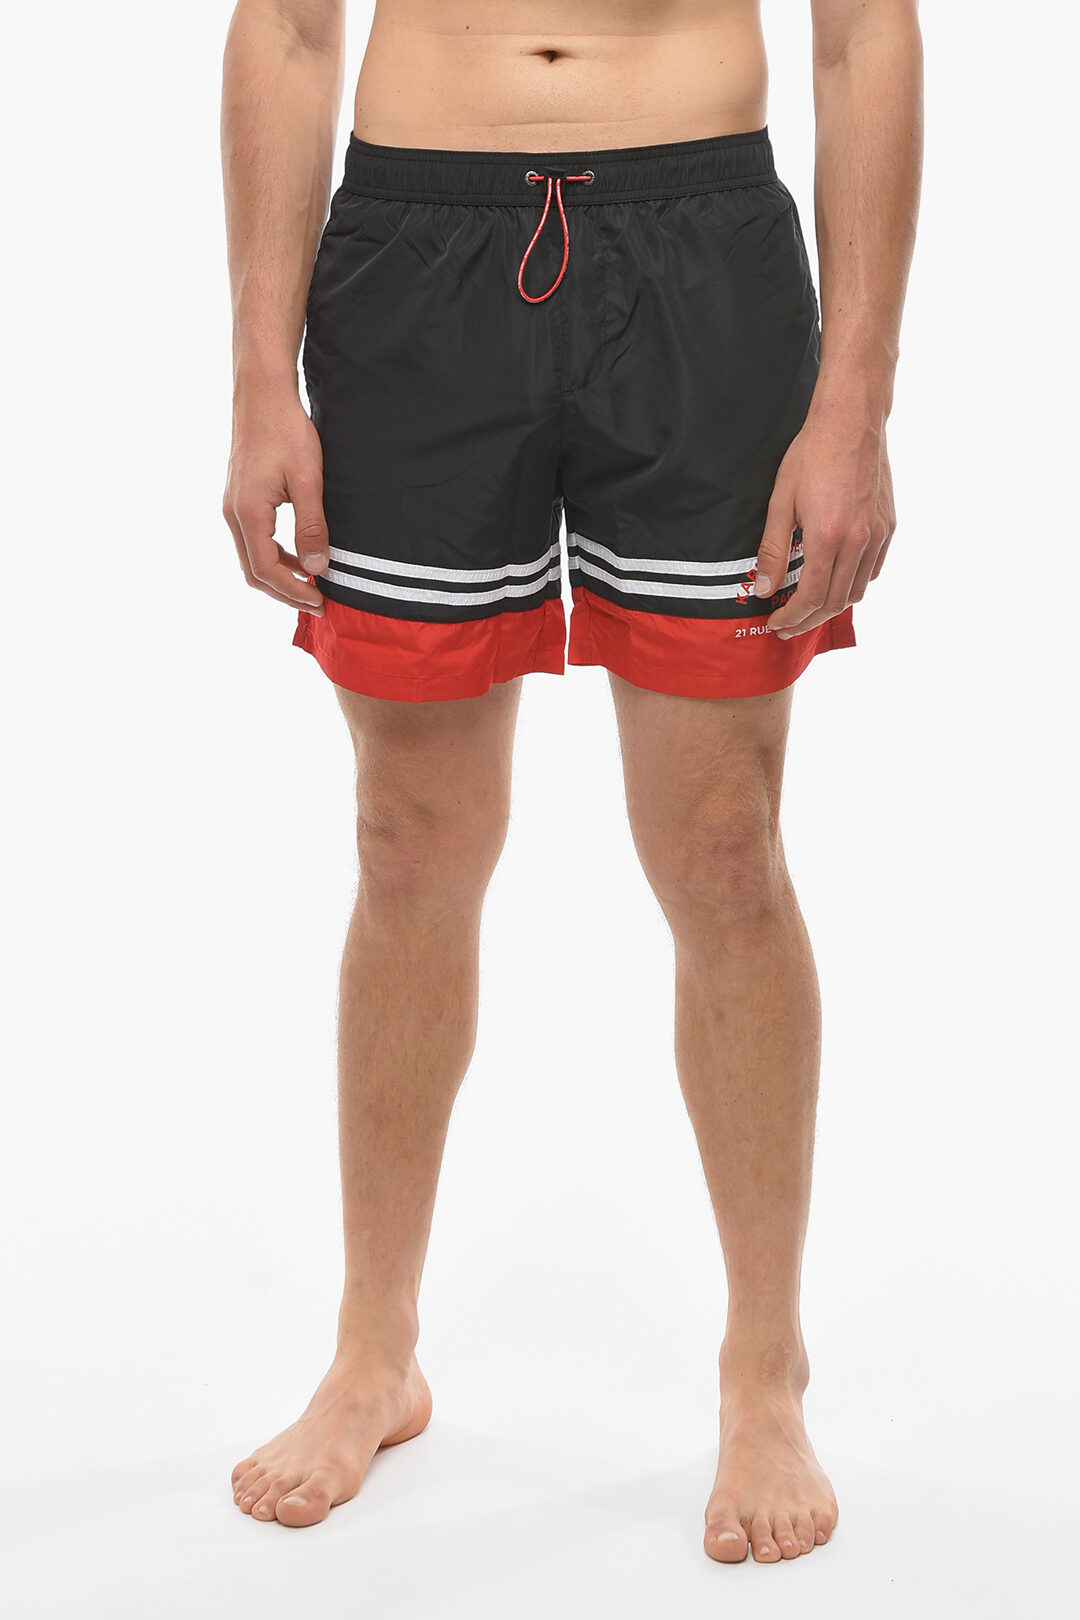 Karl Lagerfeld RUE ST-GUILLAUME Swim Shorts GOLF With Contrasting ...